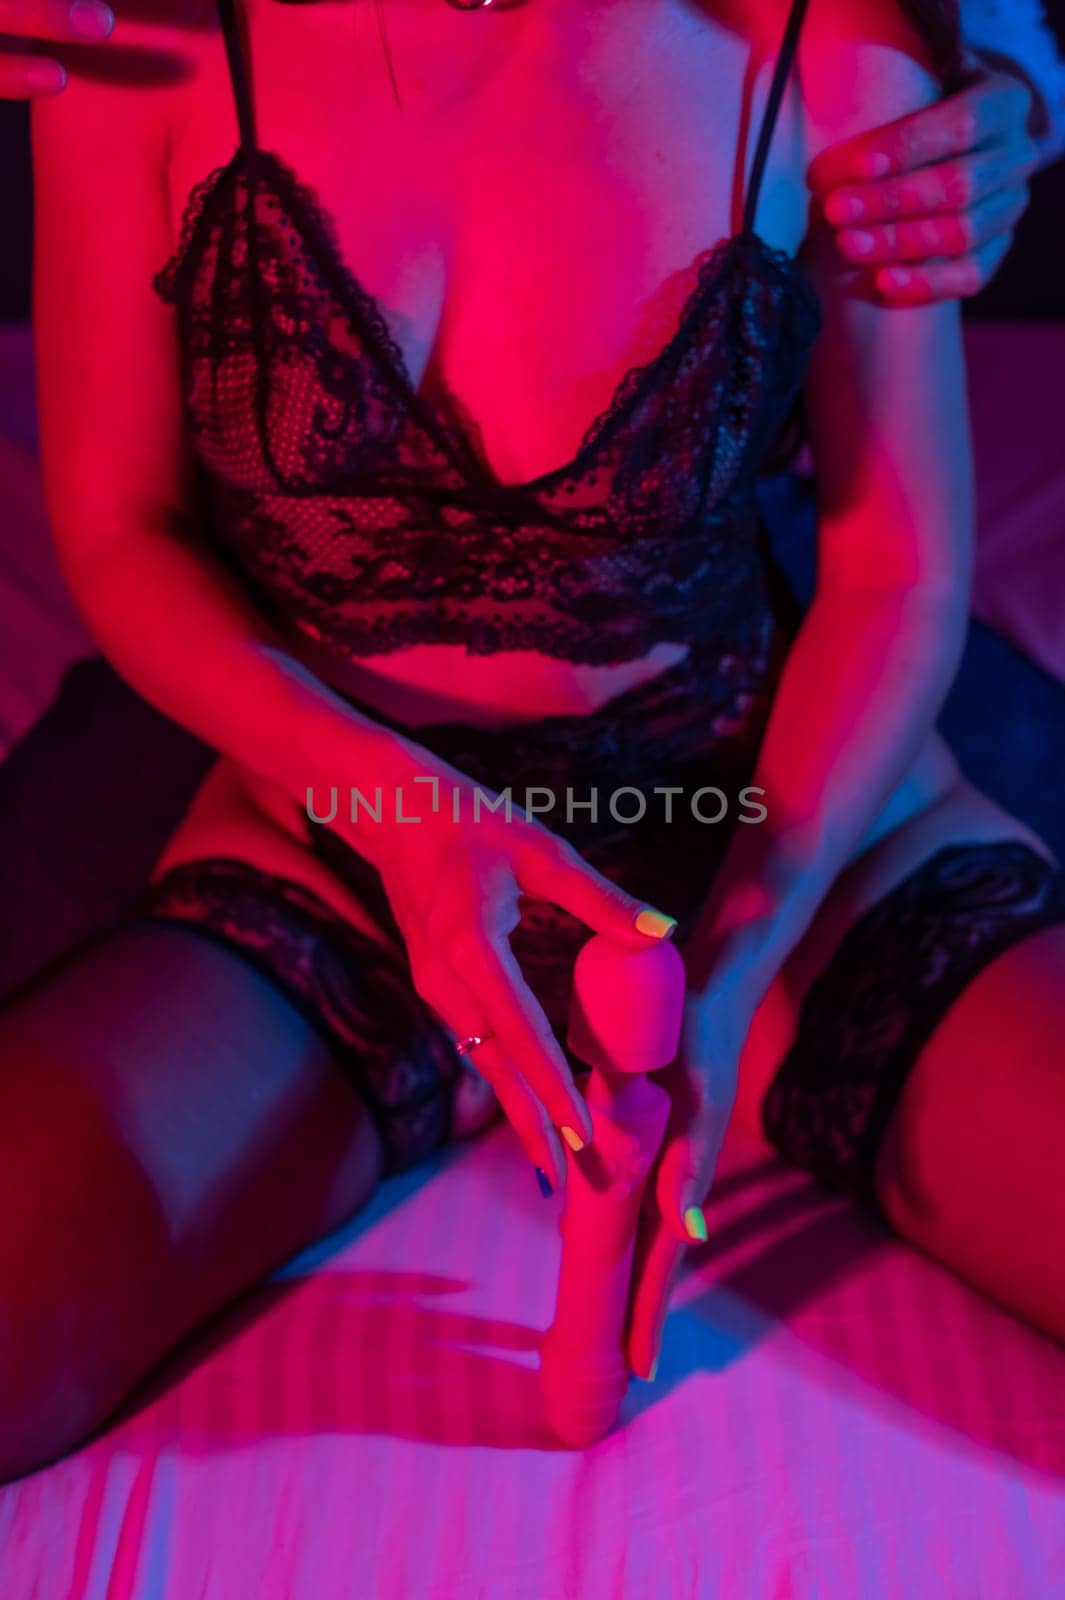 Man and woman in bedroom in red blue neon light using dildo. by mrwed54